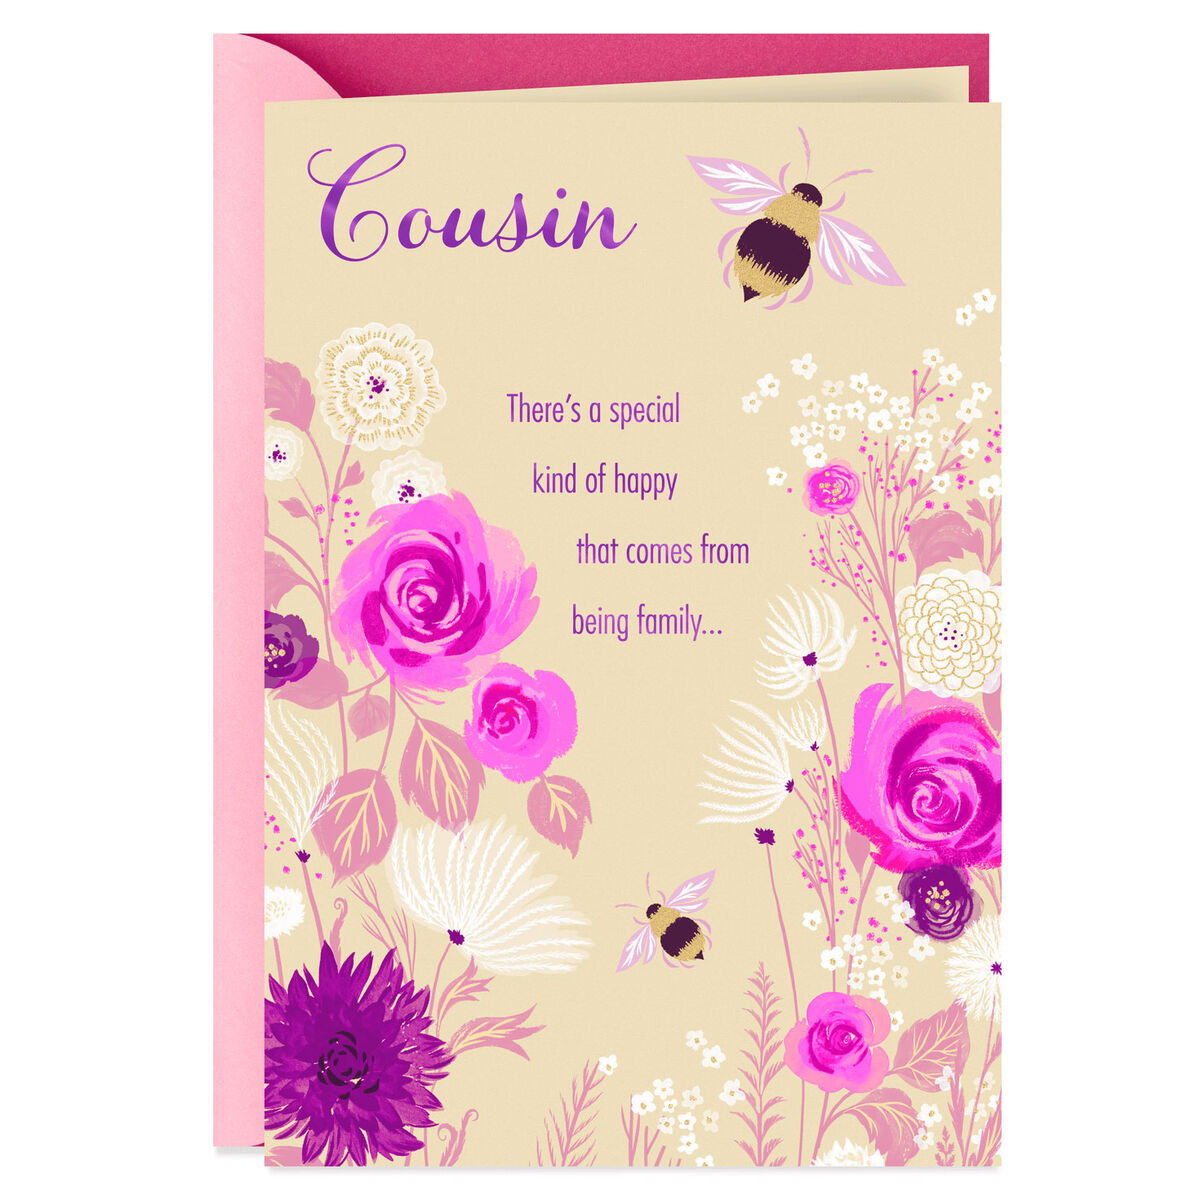 So Happy We Are Family Mother's Day Card for Cousin - Greeting Cards